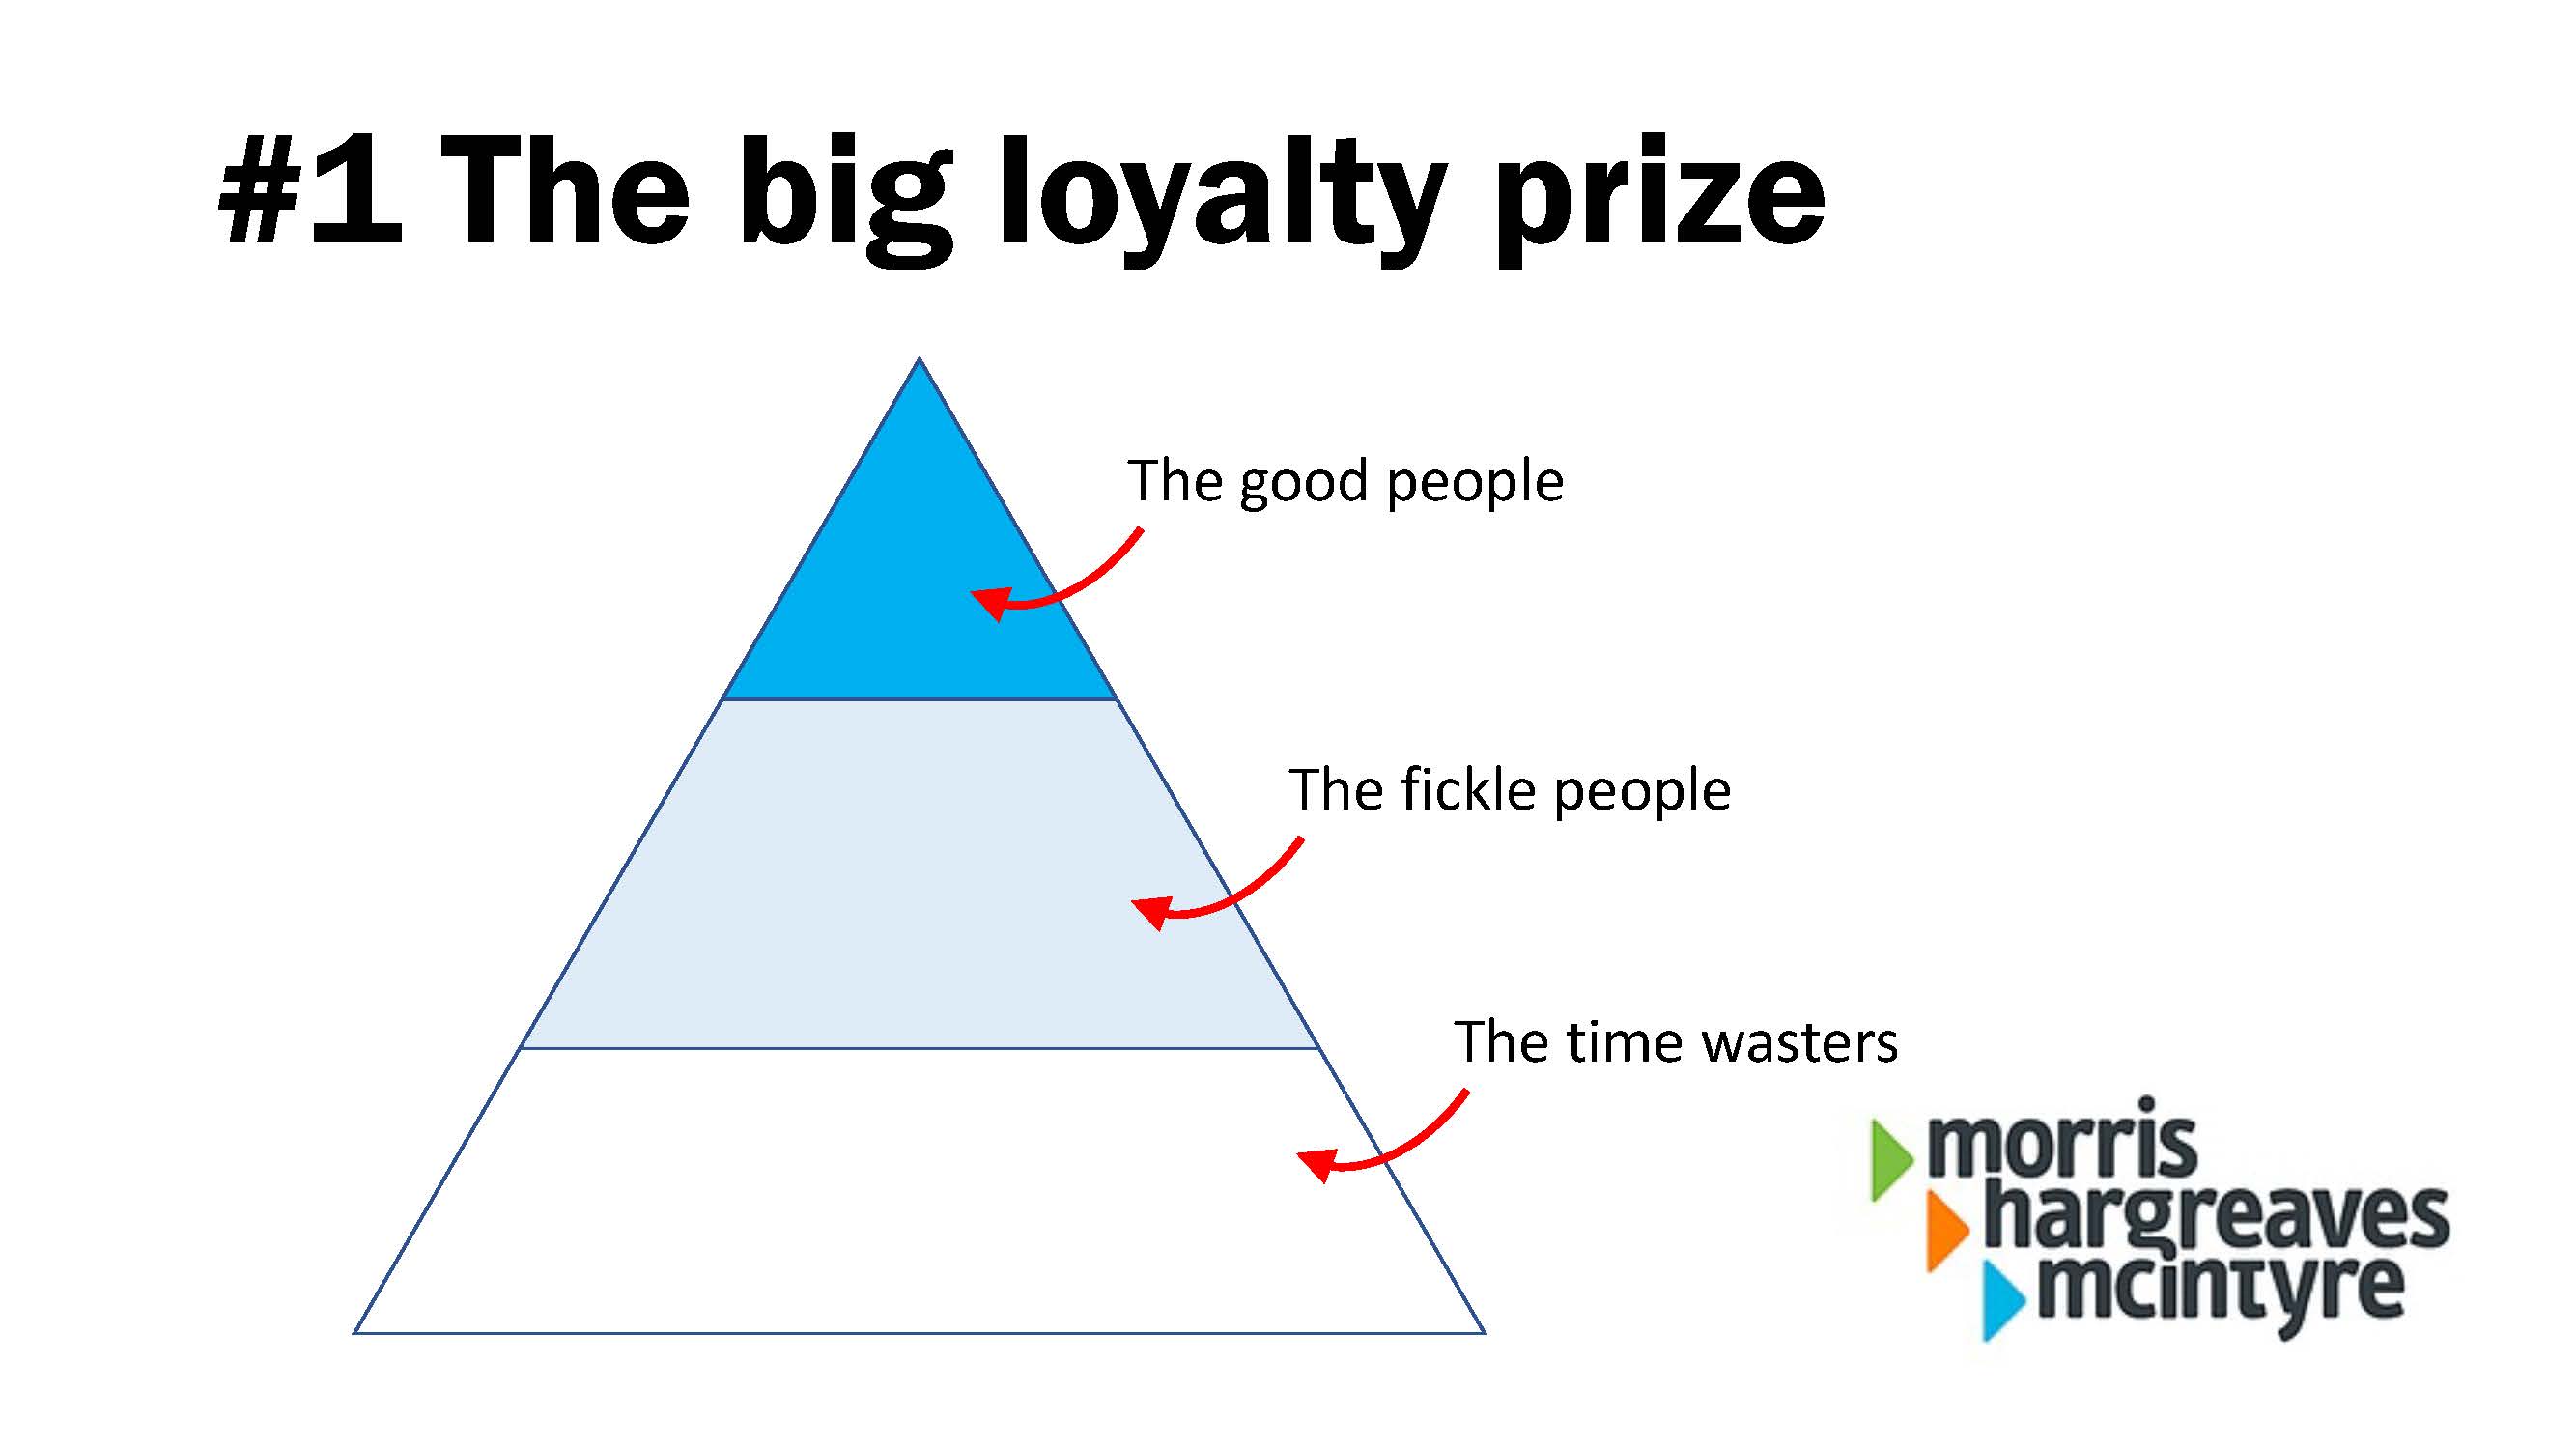 A pyramid showing good people at the top, fickle people in the middle and time wasters at the bottom